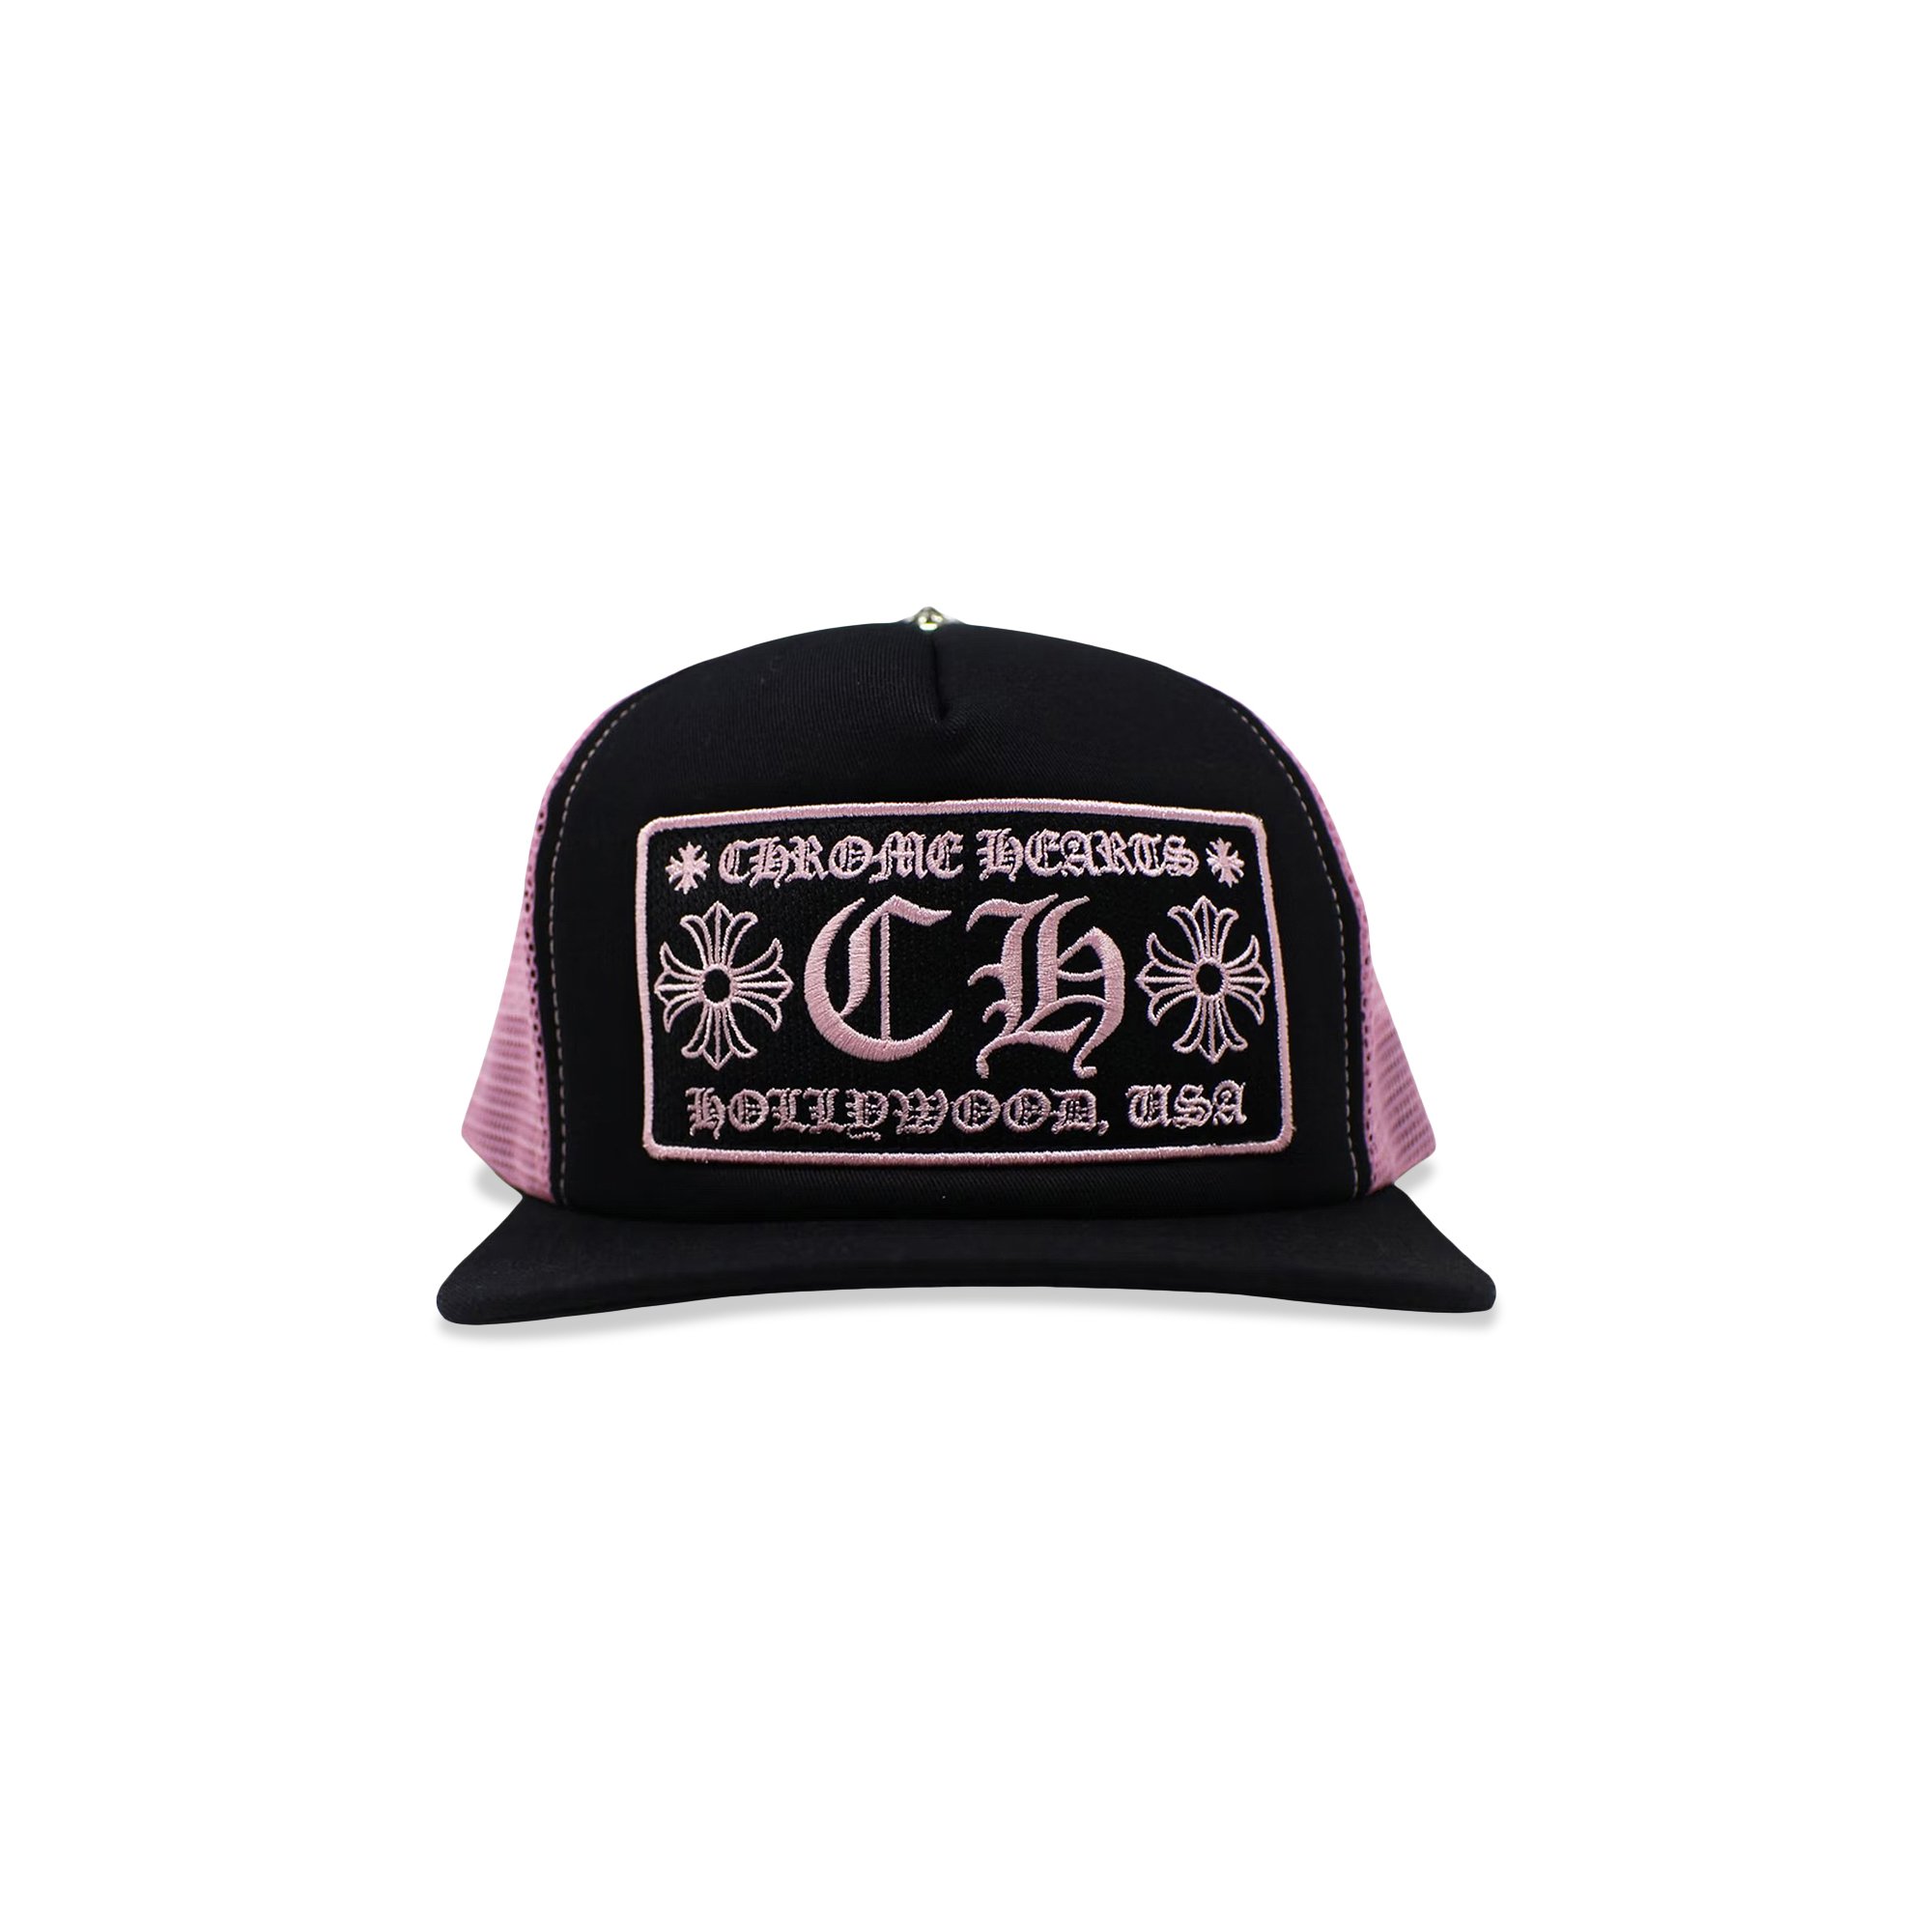 Buy Chrome Hearts Hollywood Trucker Hat 'Black/Pink' - 1383